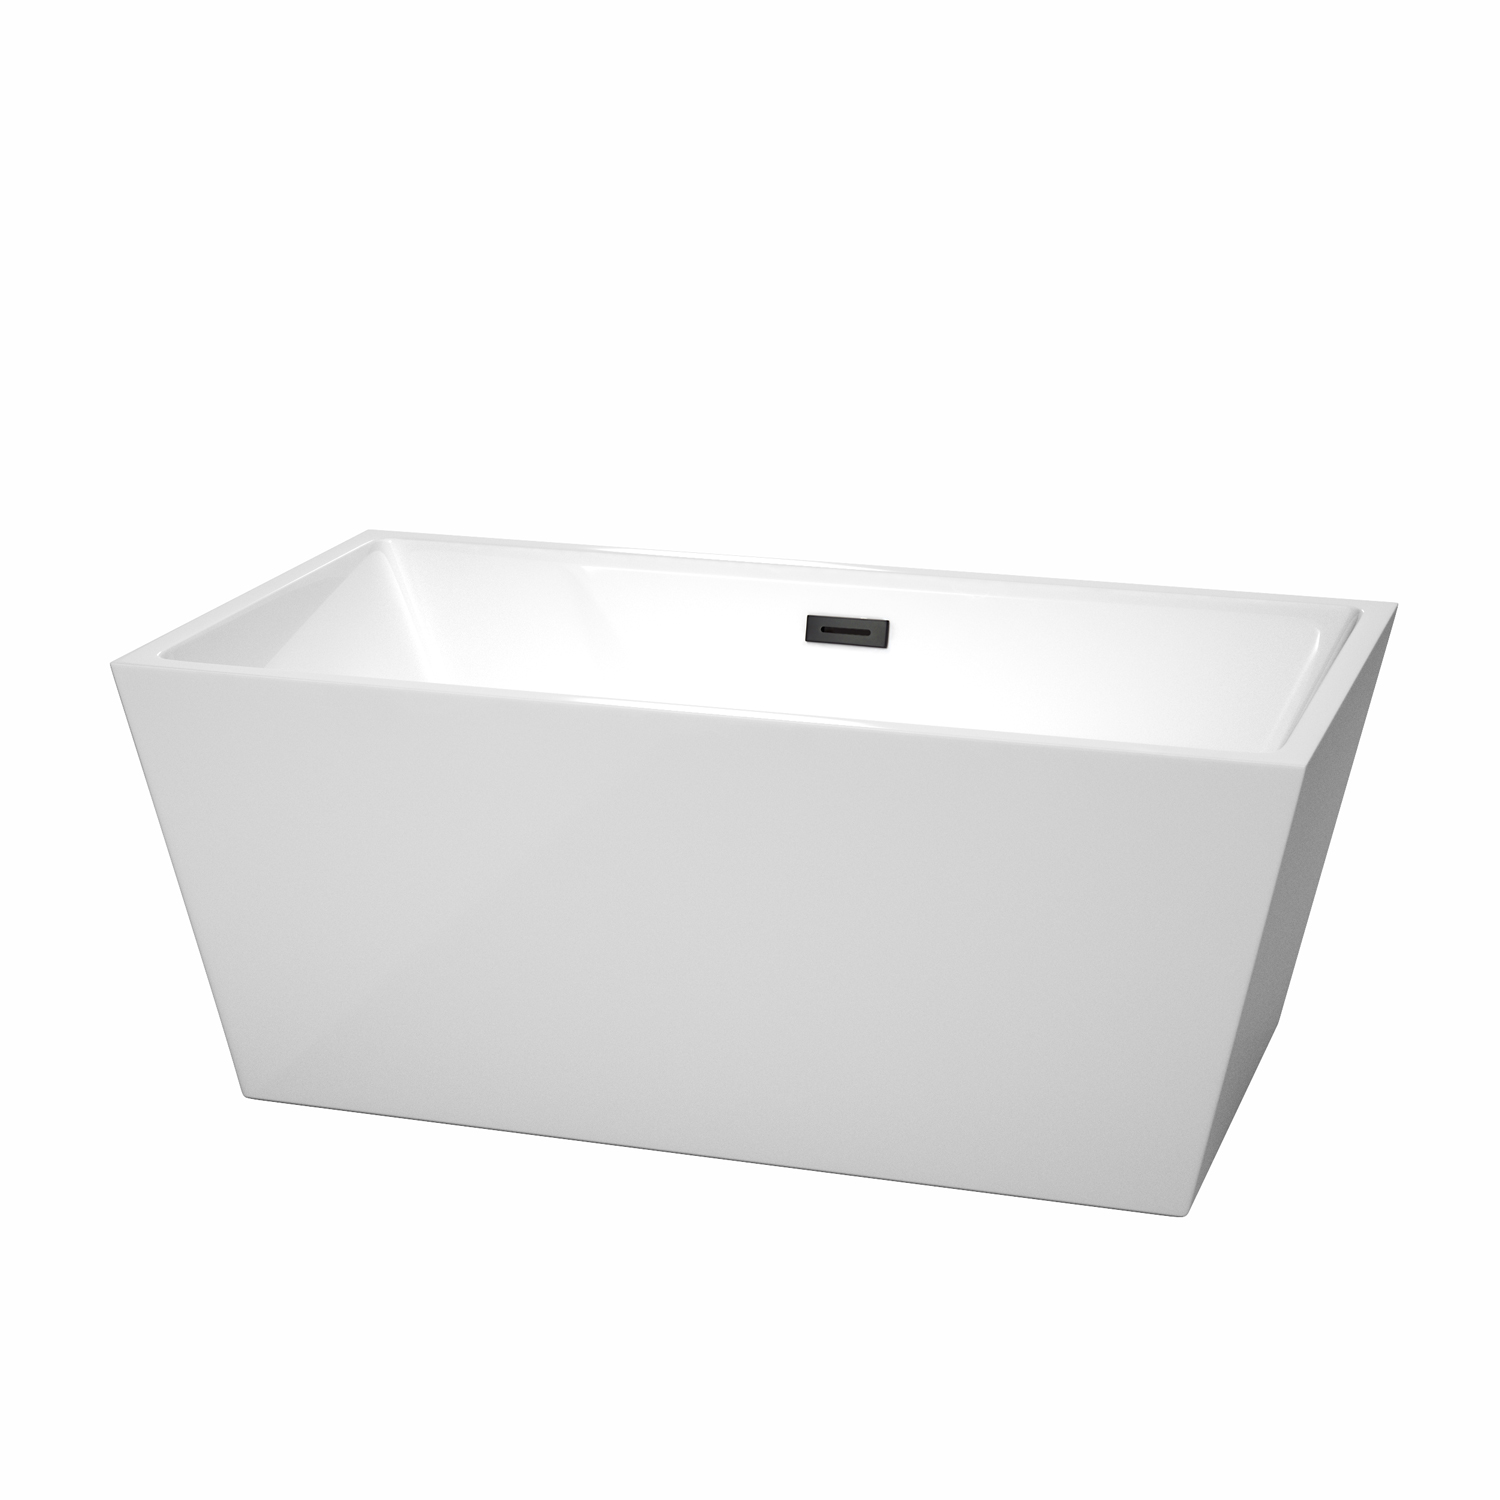 59" Freestanding Bathtub in White Finish with Matte Black Drain and Overflow Trim